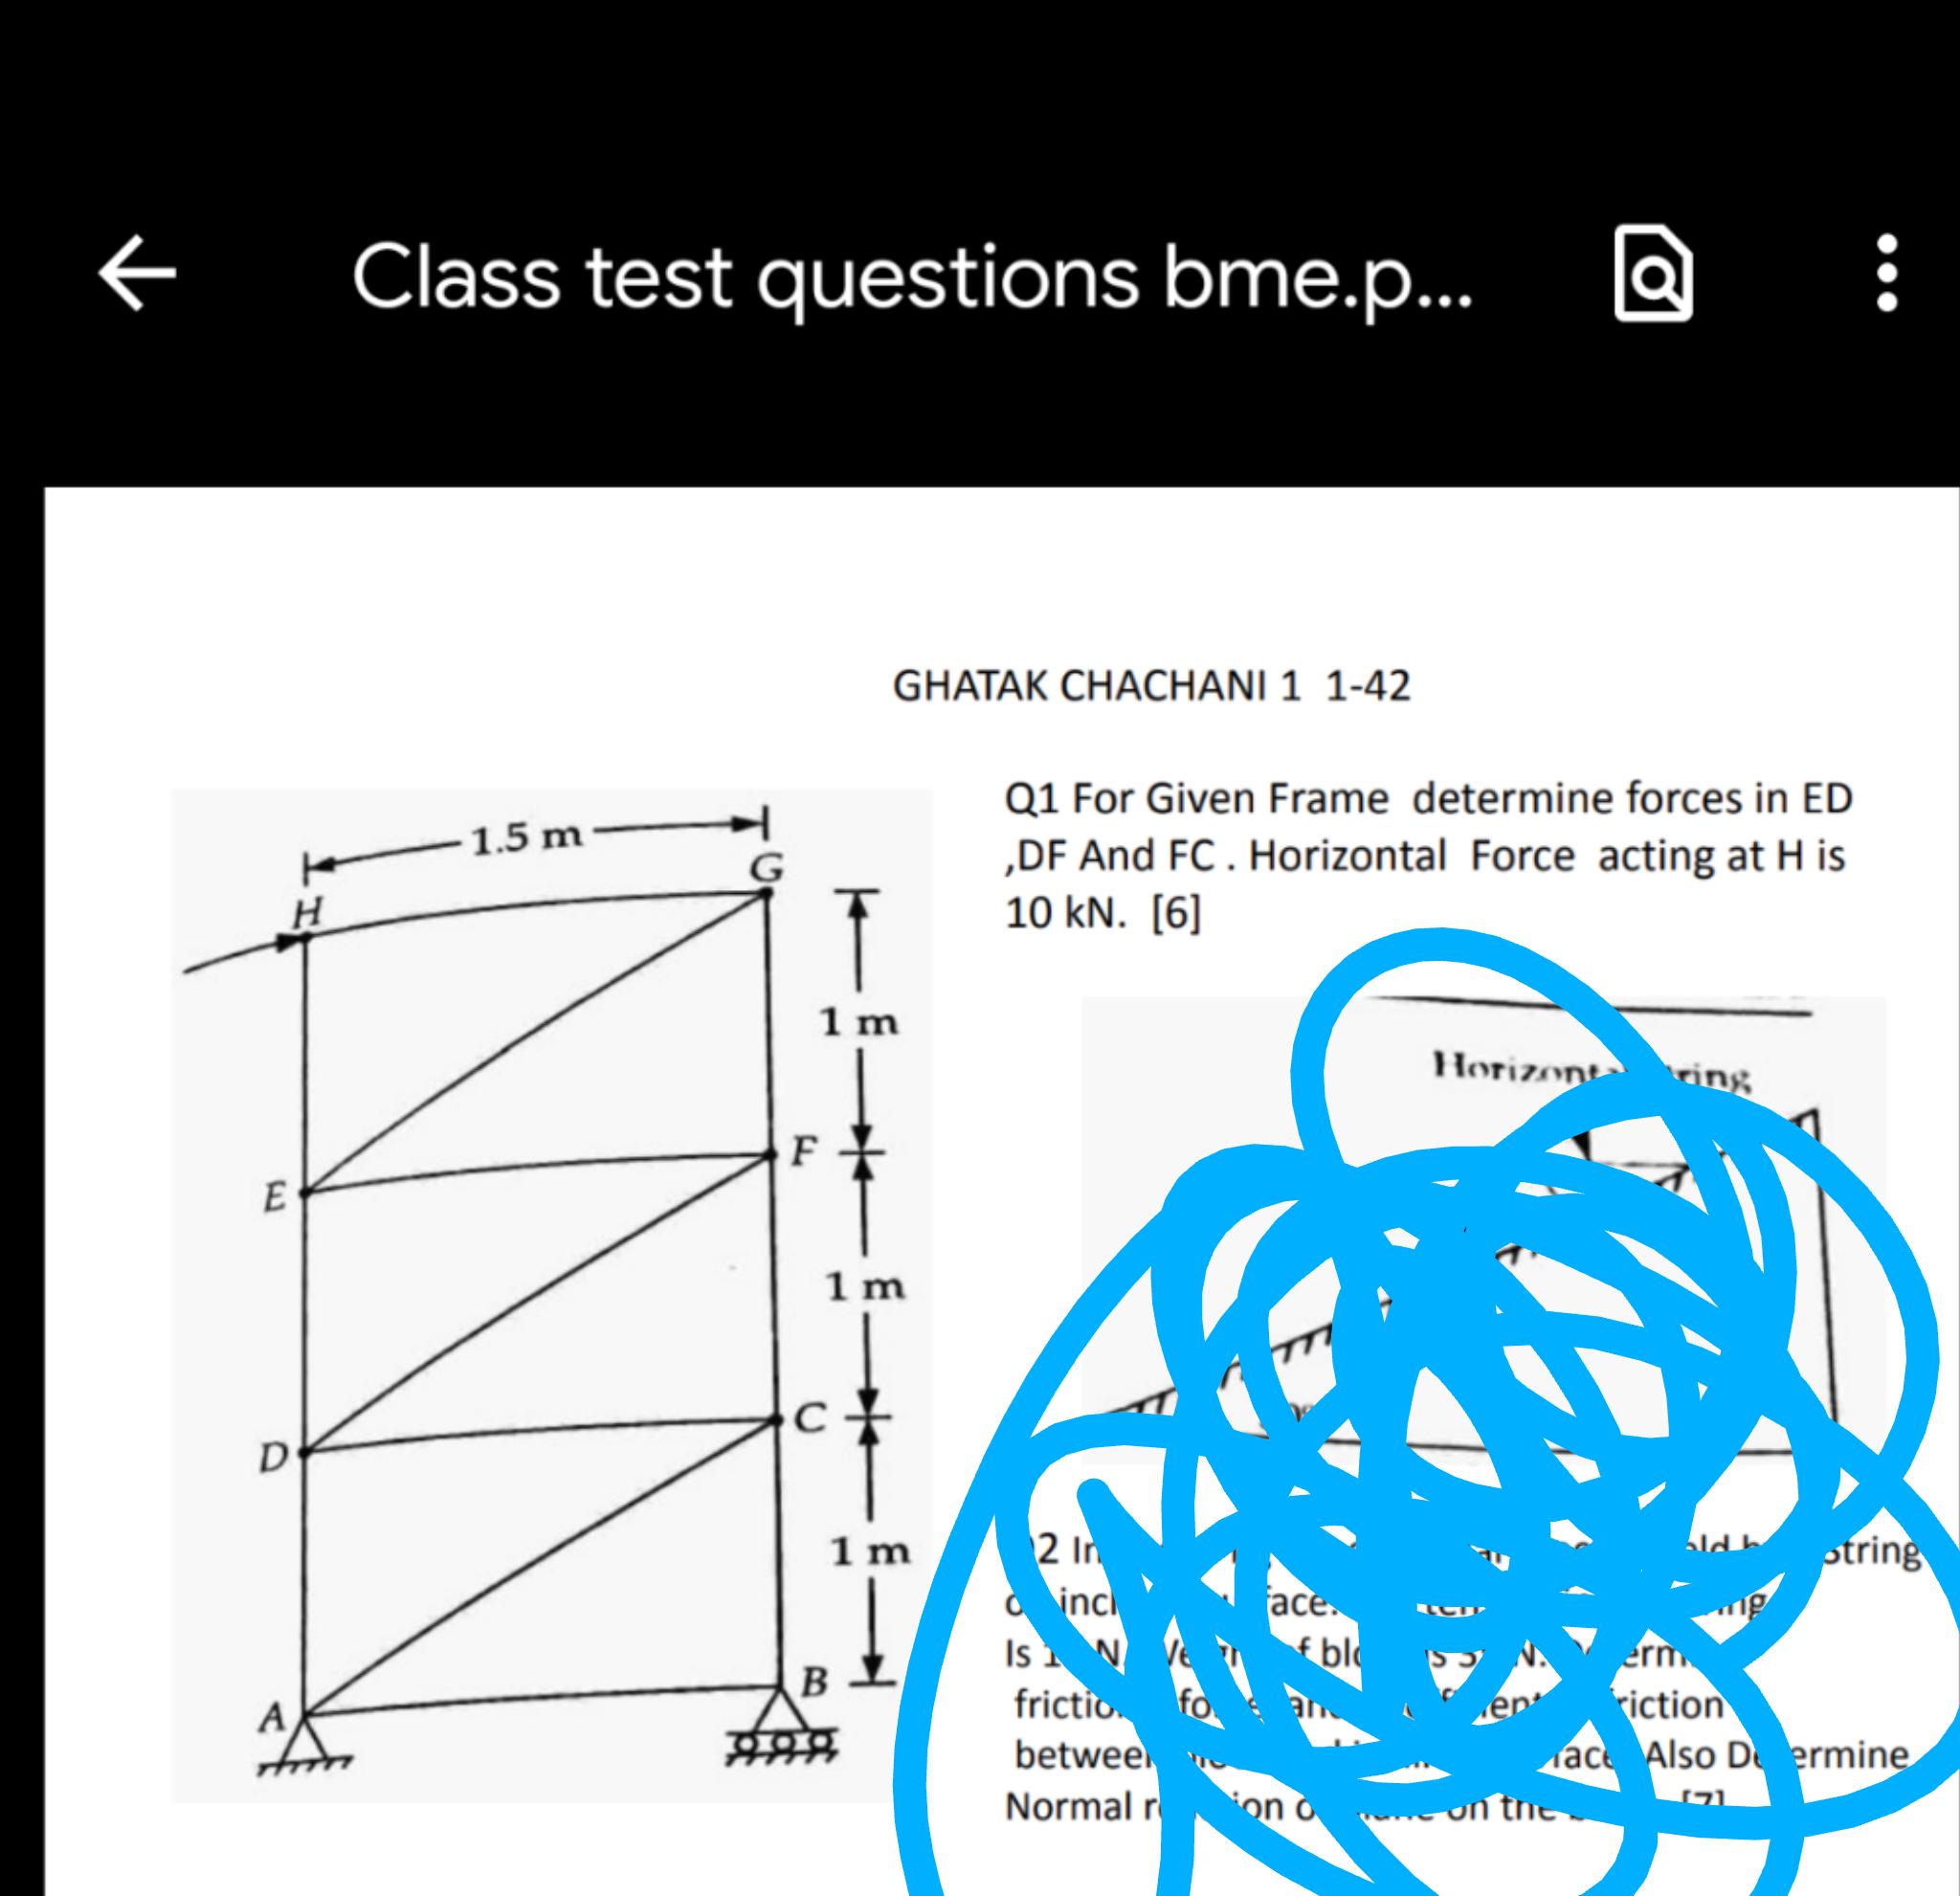 k H E D A Class test questions bme.p... 1.5 m G 1 m F GHATAK CHACHANI 1 1-42 1 m C 1m B Q1 For Given Frame